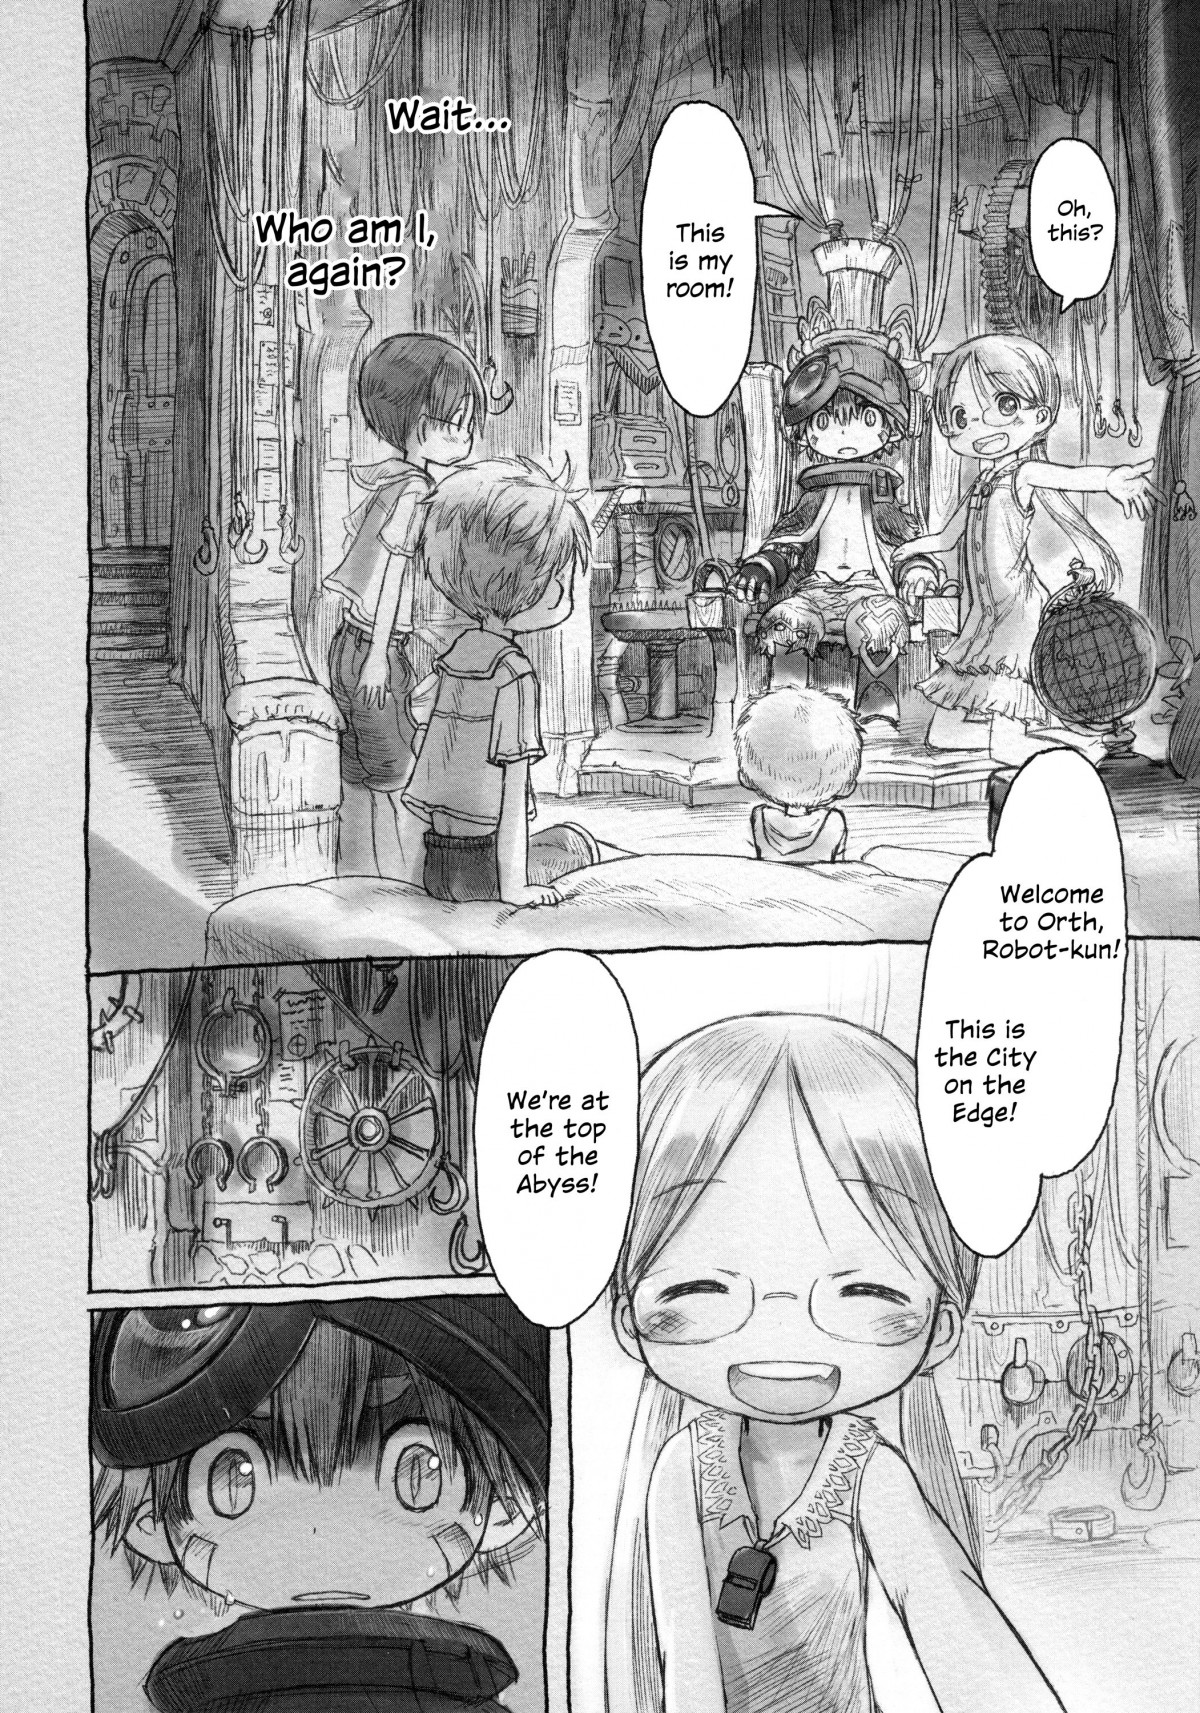 Made In Abyss Manga Chapter 3 English Online In High Quality